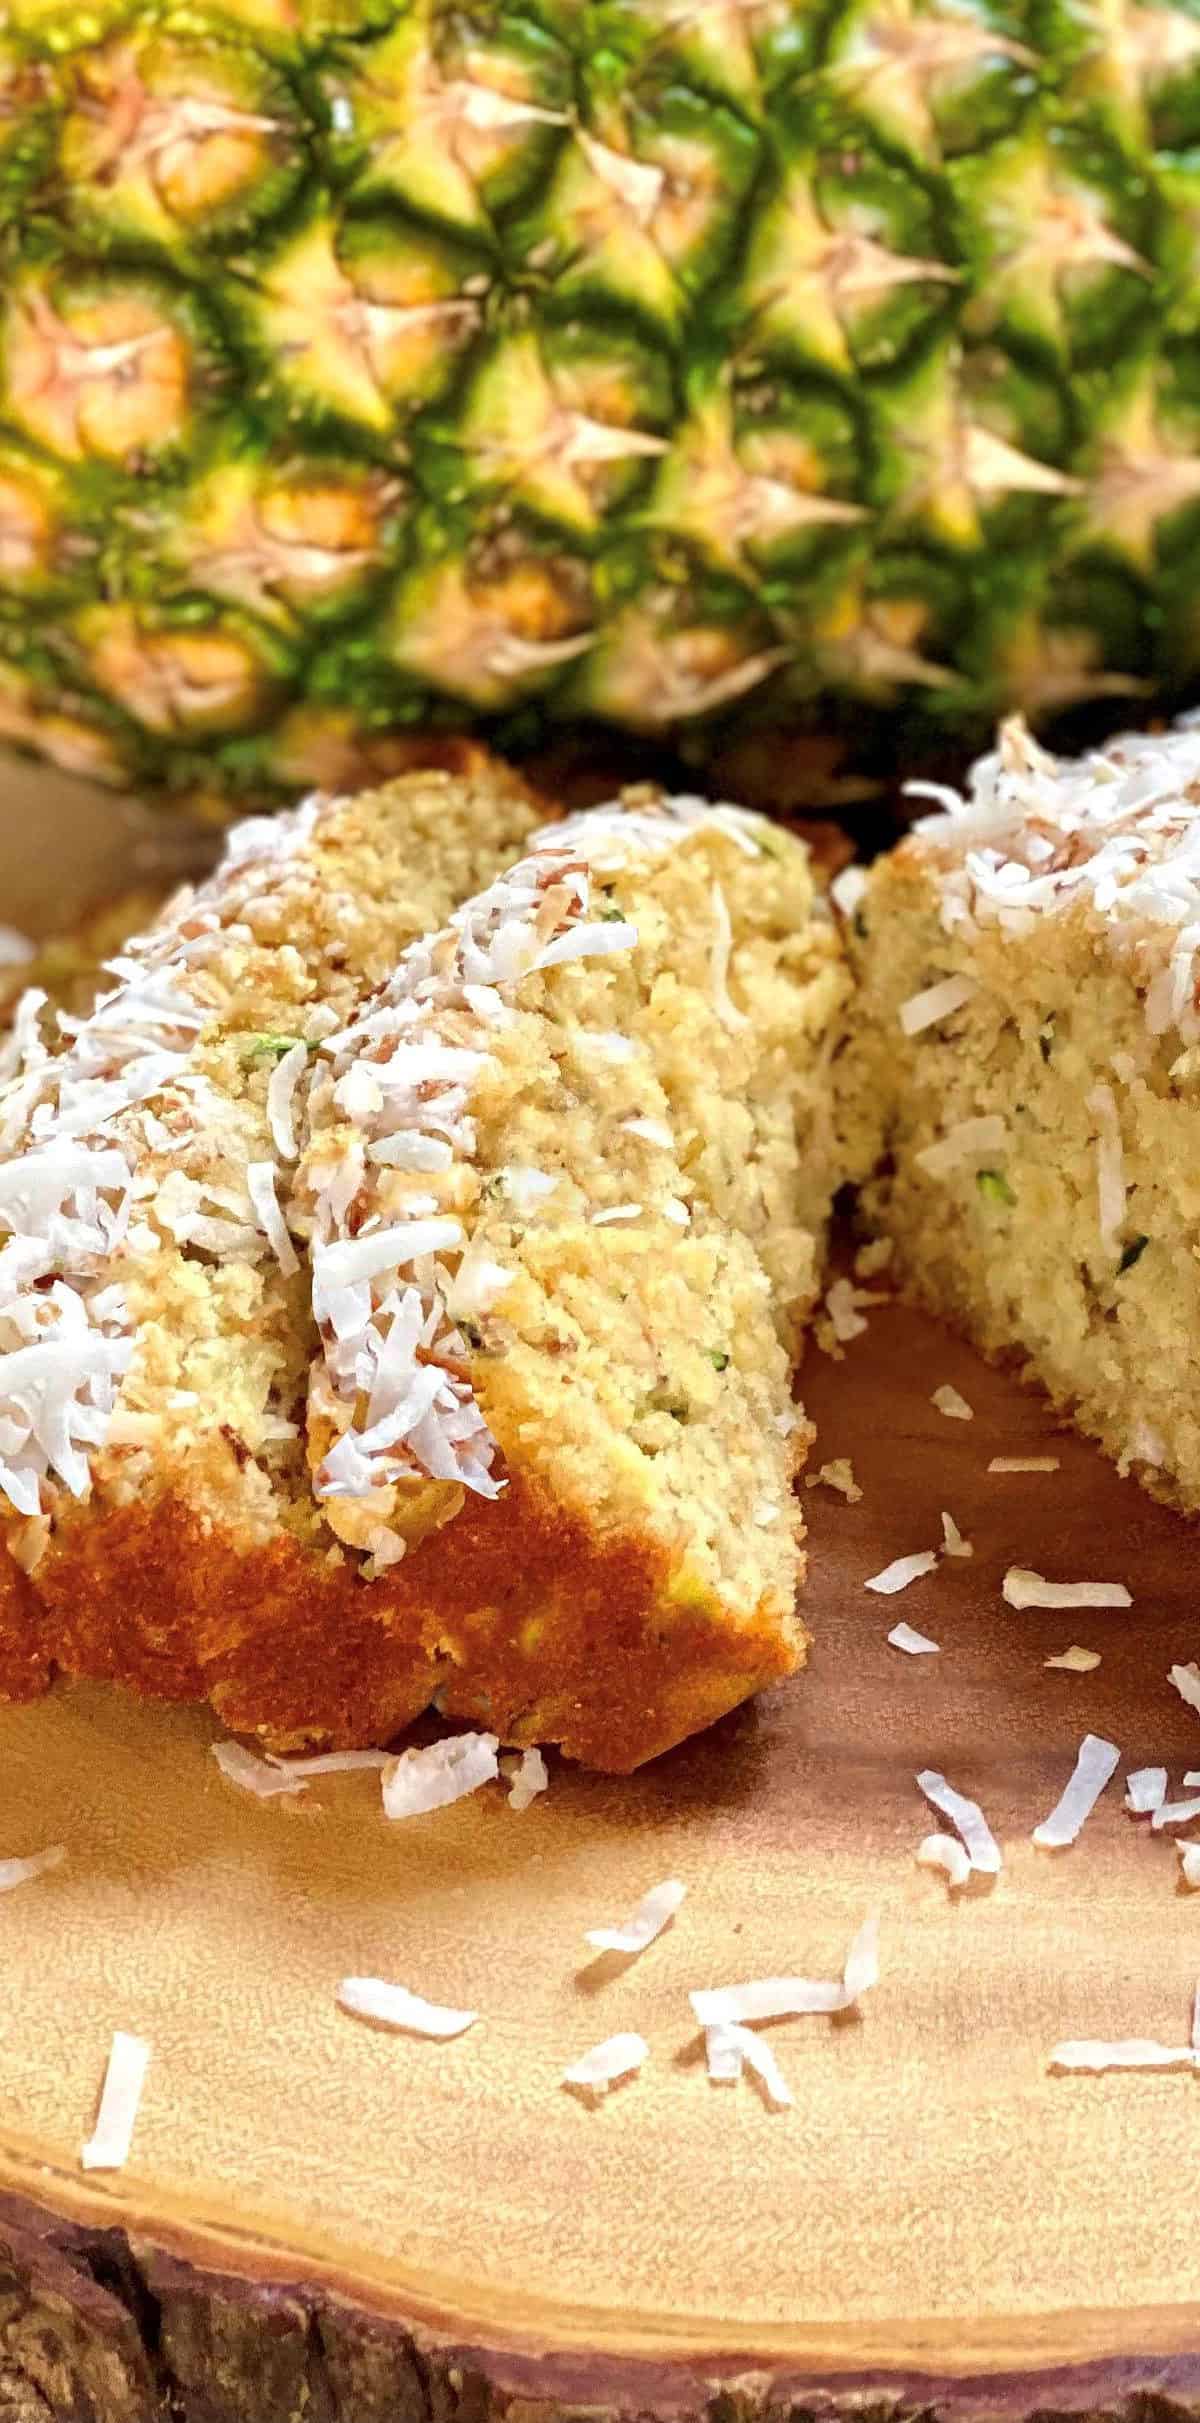  Who said zucchini bread had to be boring? Add some excitement with this recipe!